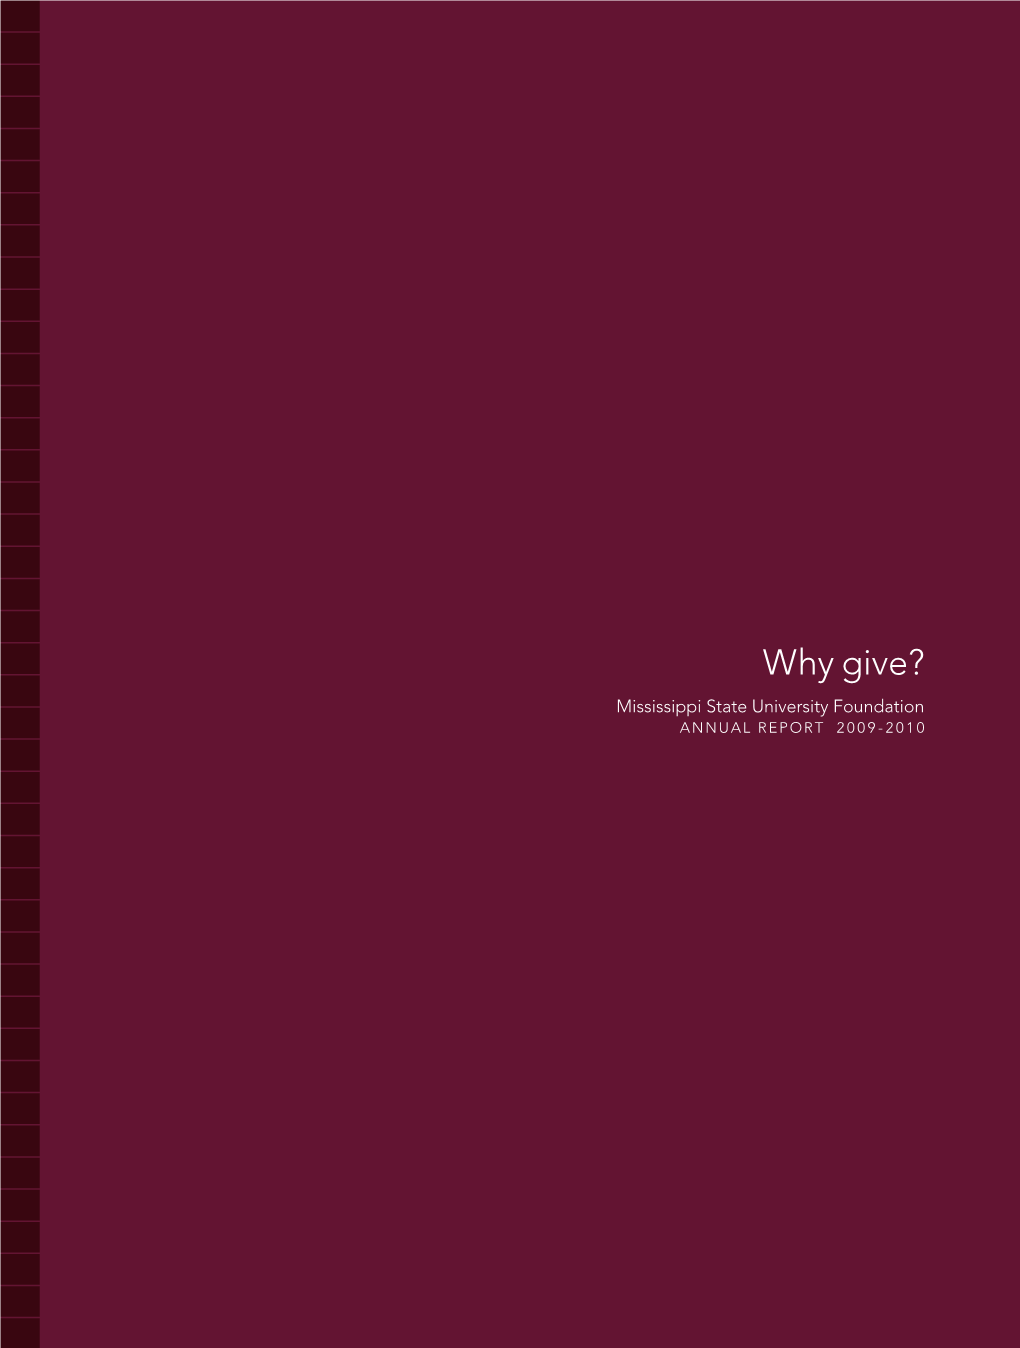 Why Give? Mississippi State University Foundation ANNUAL REPORT 2009-2010